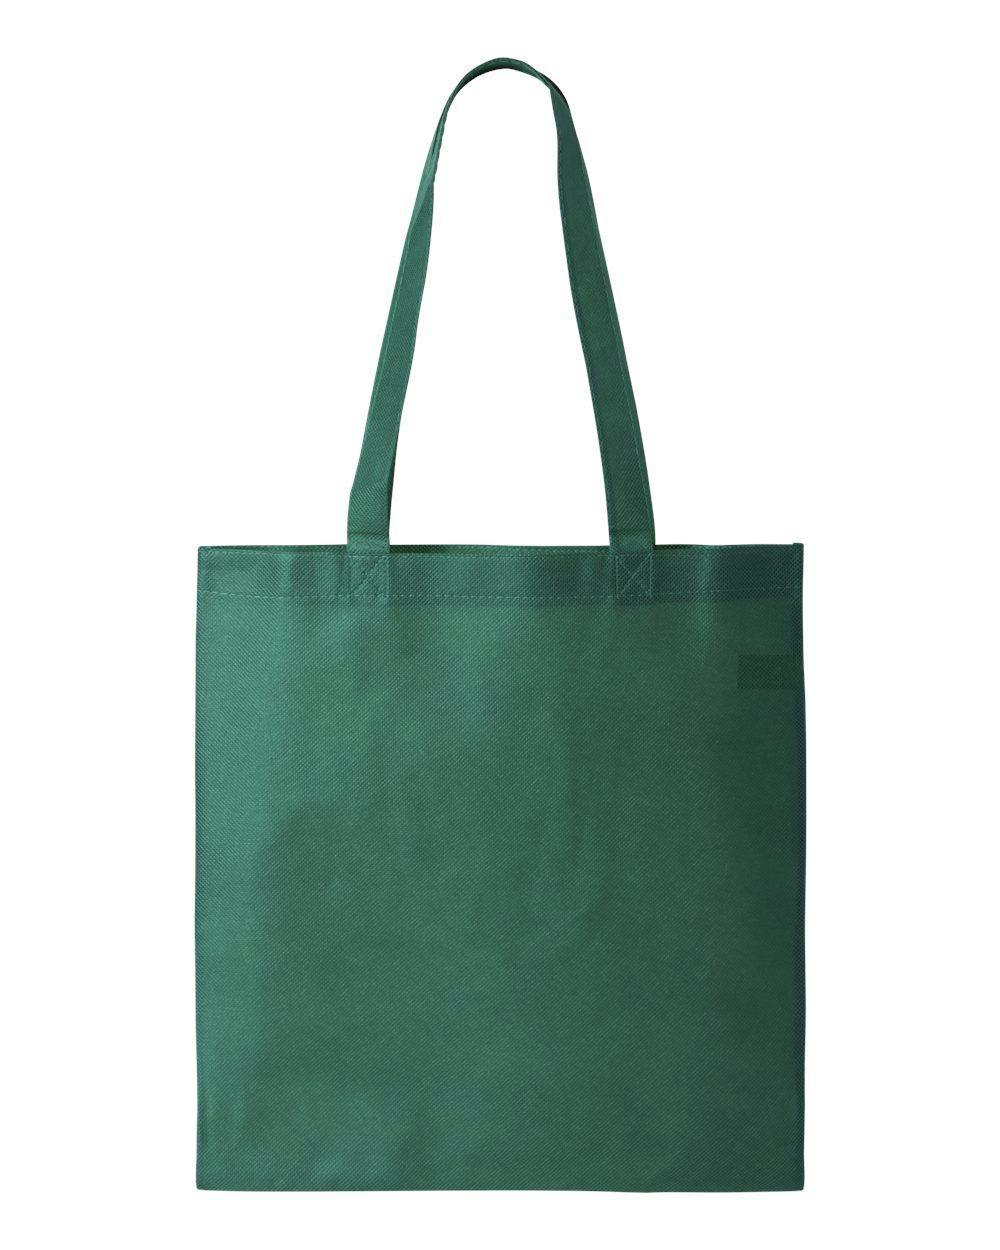 Image for Non-Woven Tote - FT003